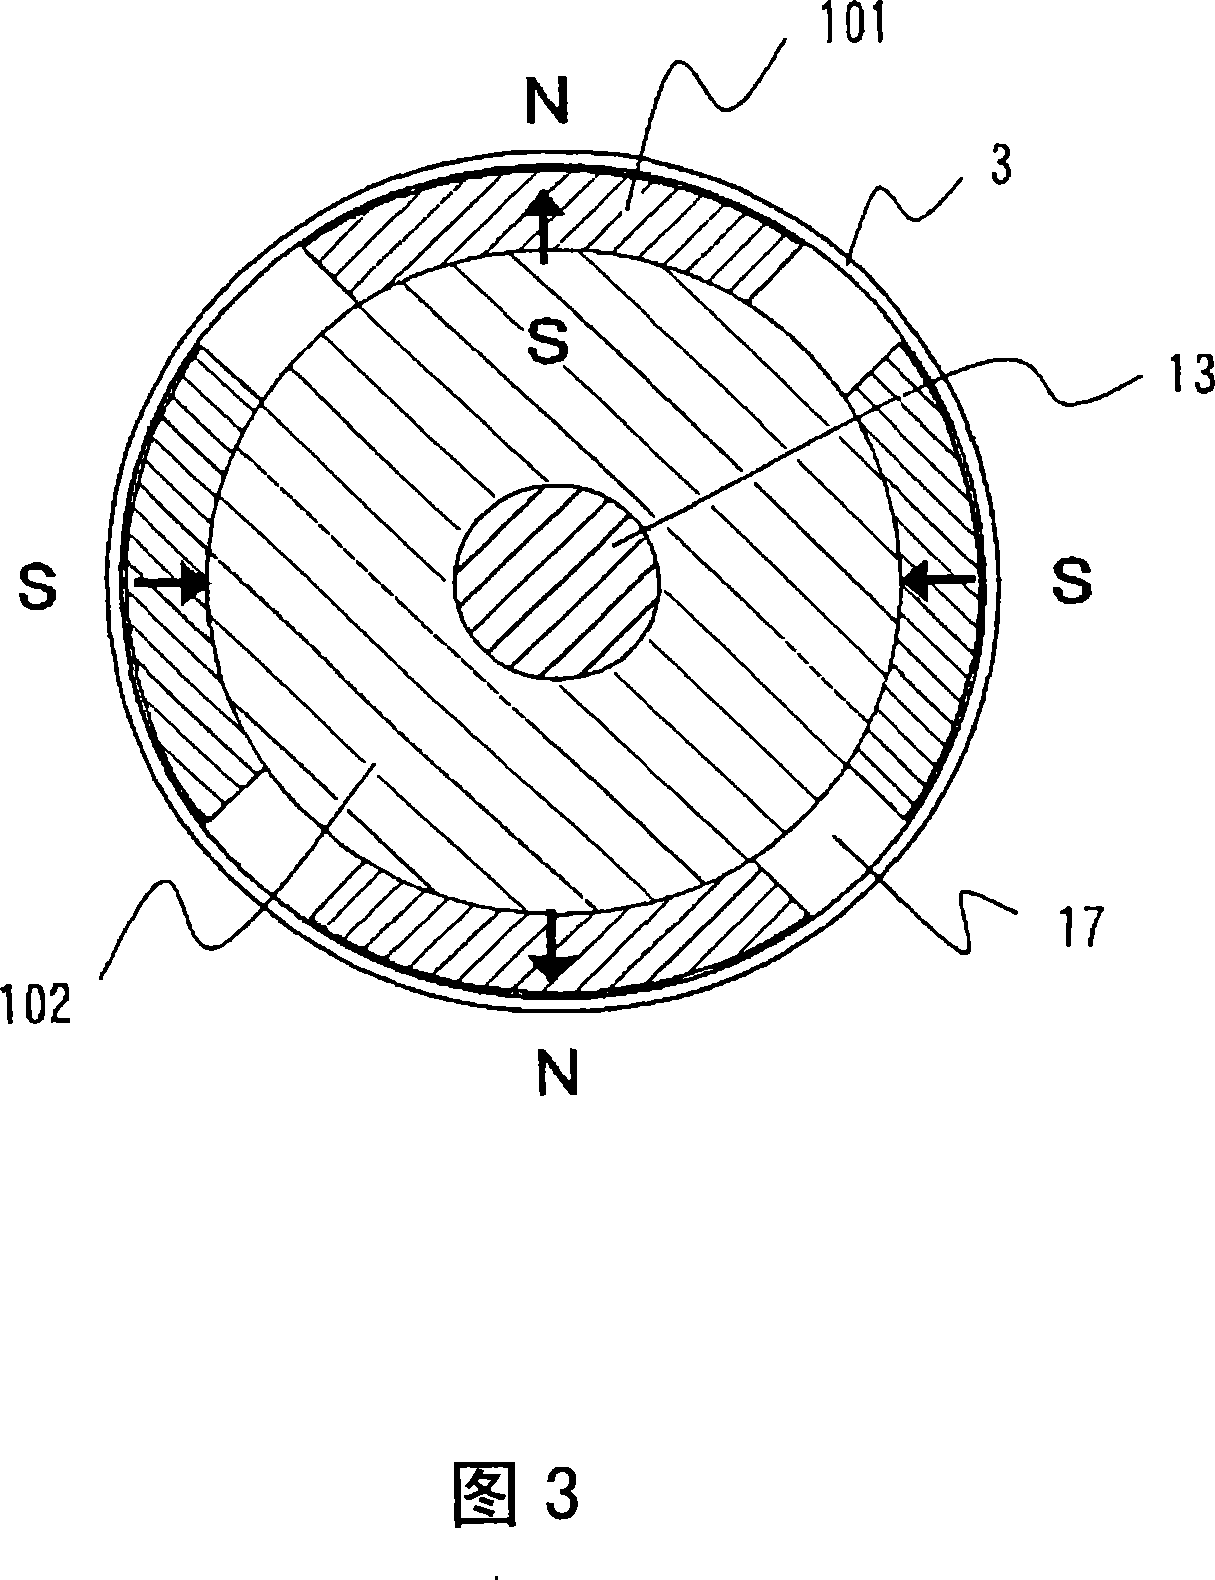 Rotor for motor and manufacturing method therefor